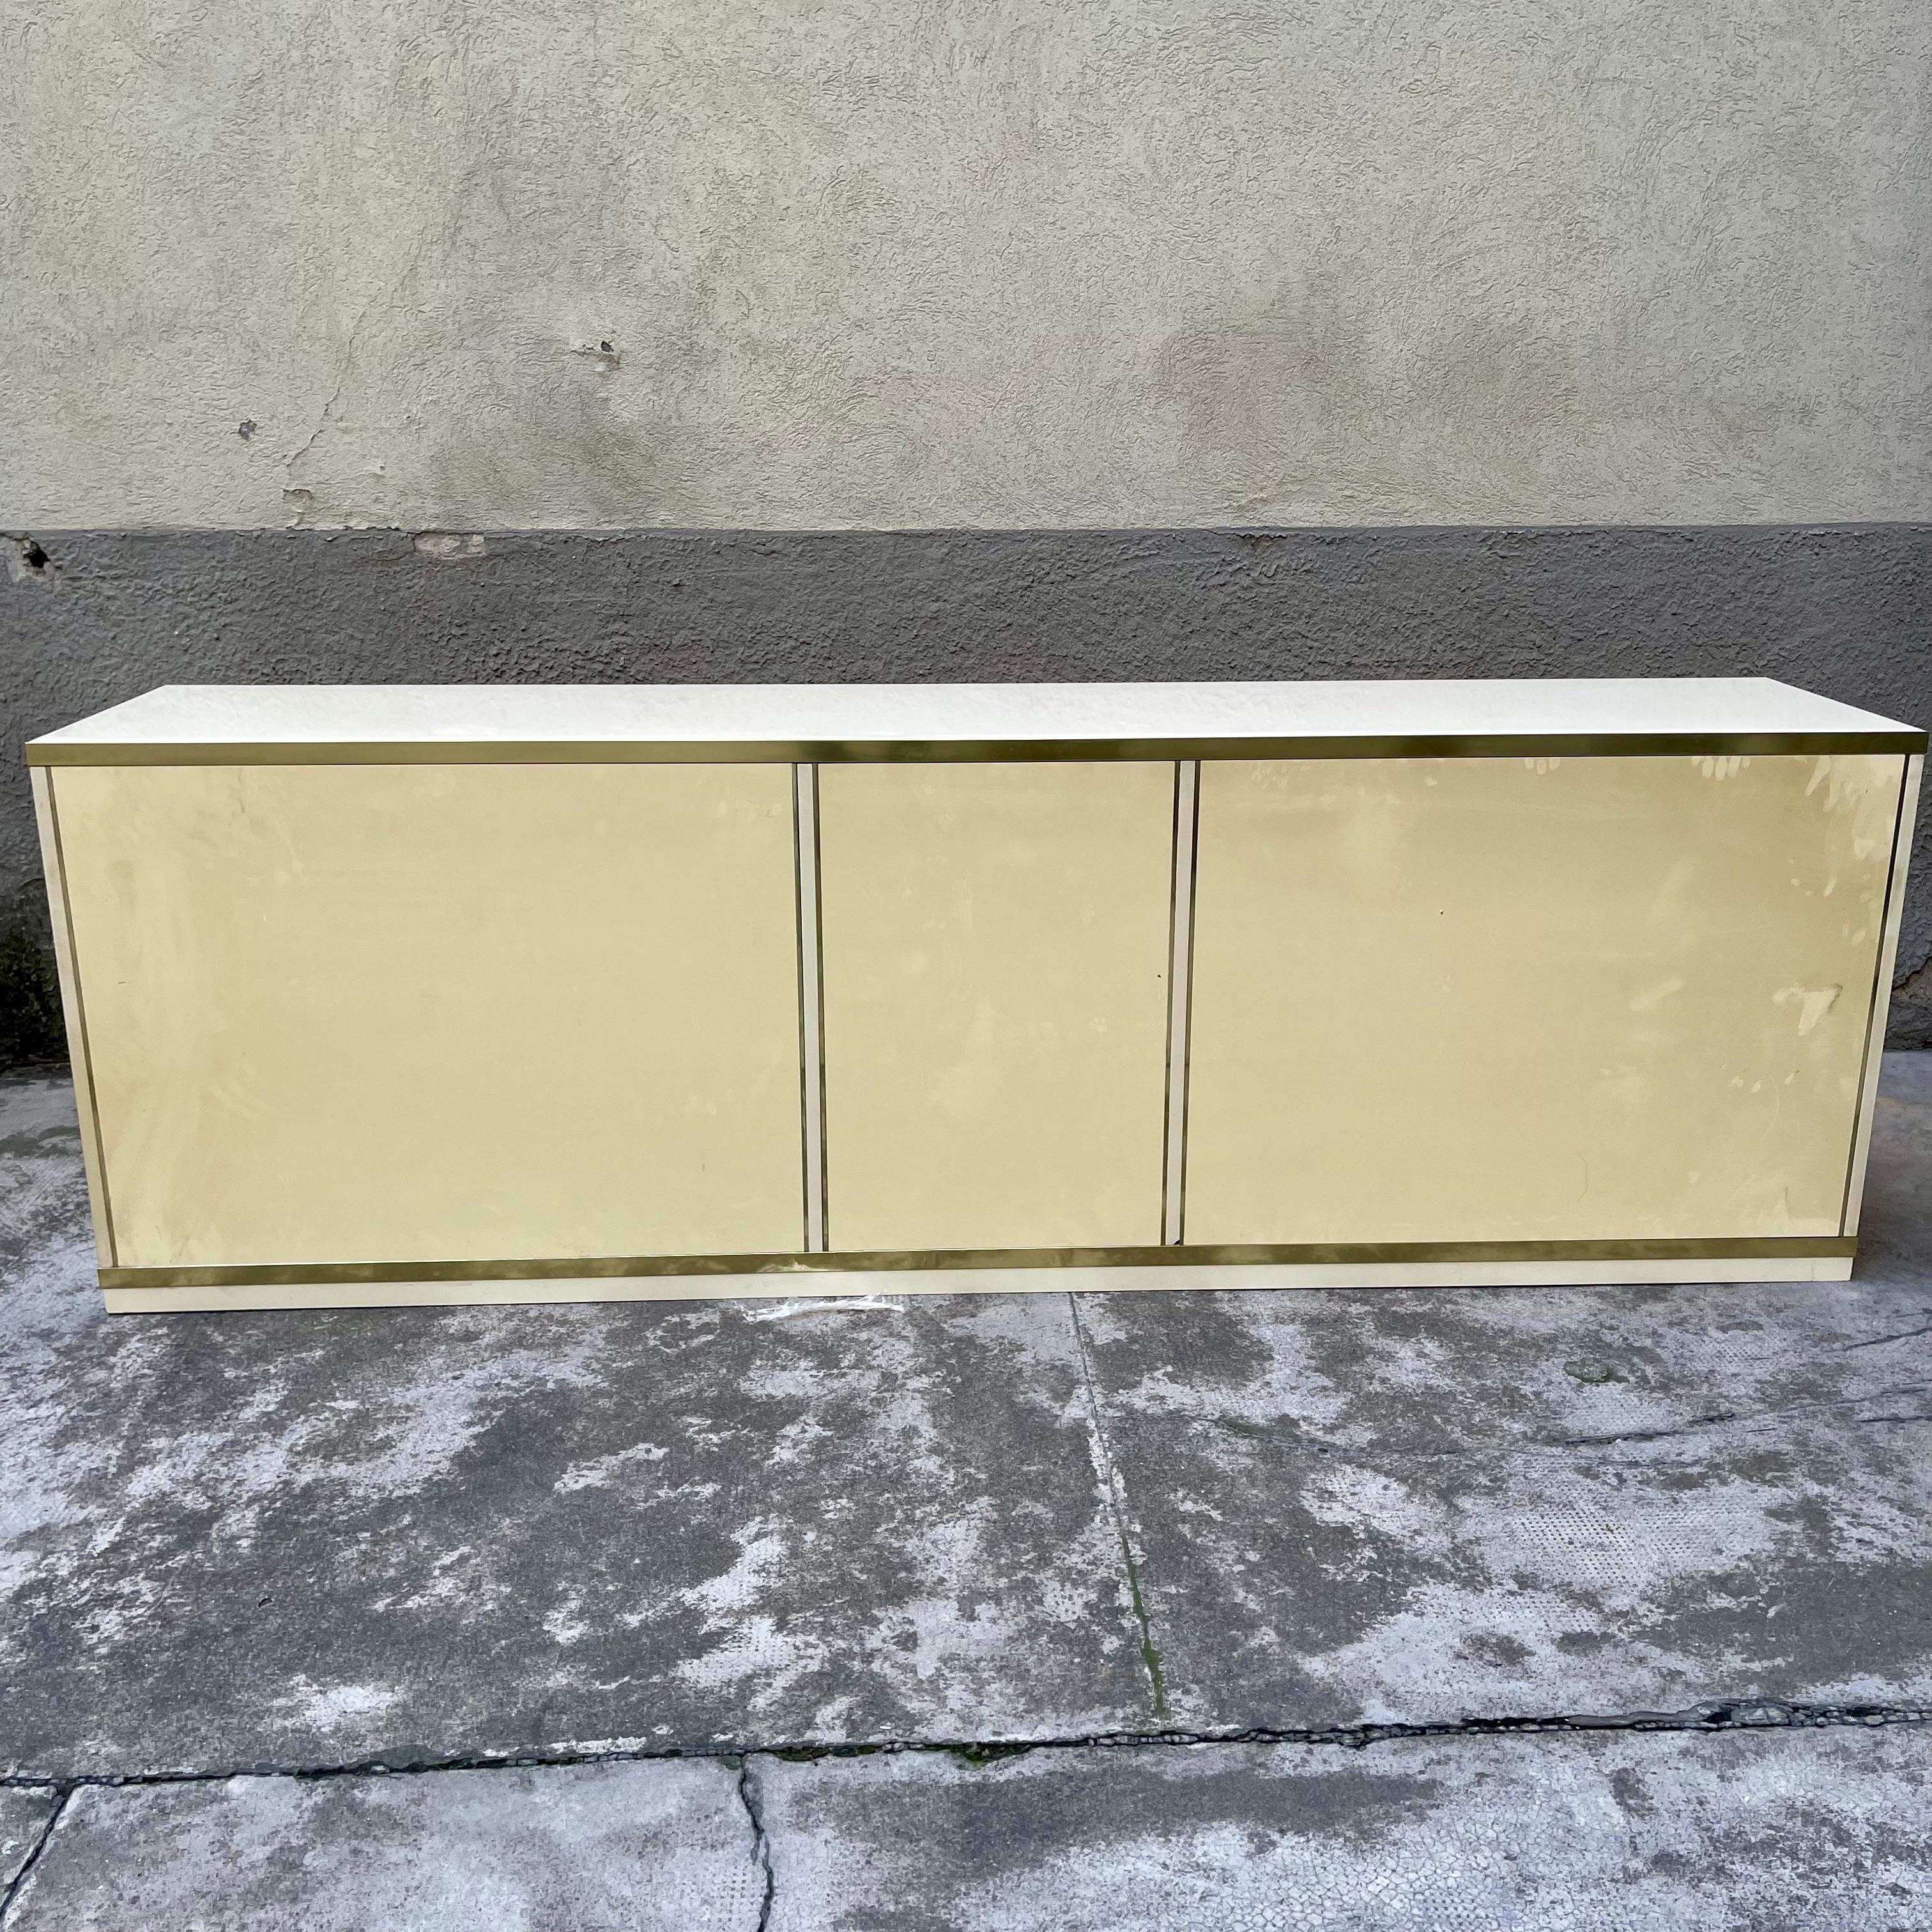 This sideboard, constructed of ivory-colored laminate and embellished with brass beading and detailing, has push-to-open doors and drawers. It is part of a complete environment, produced by the company Sabot.
The cabinet is combined with a table and